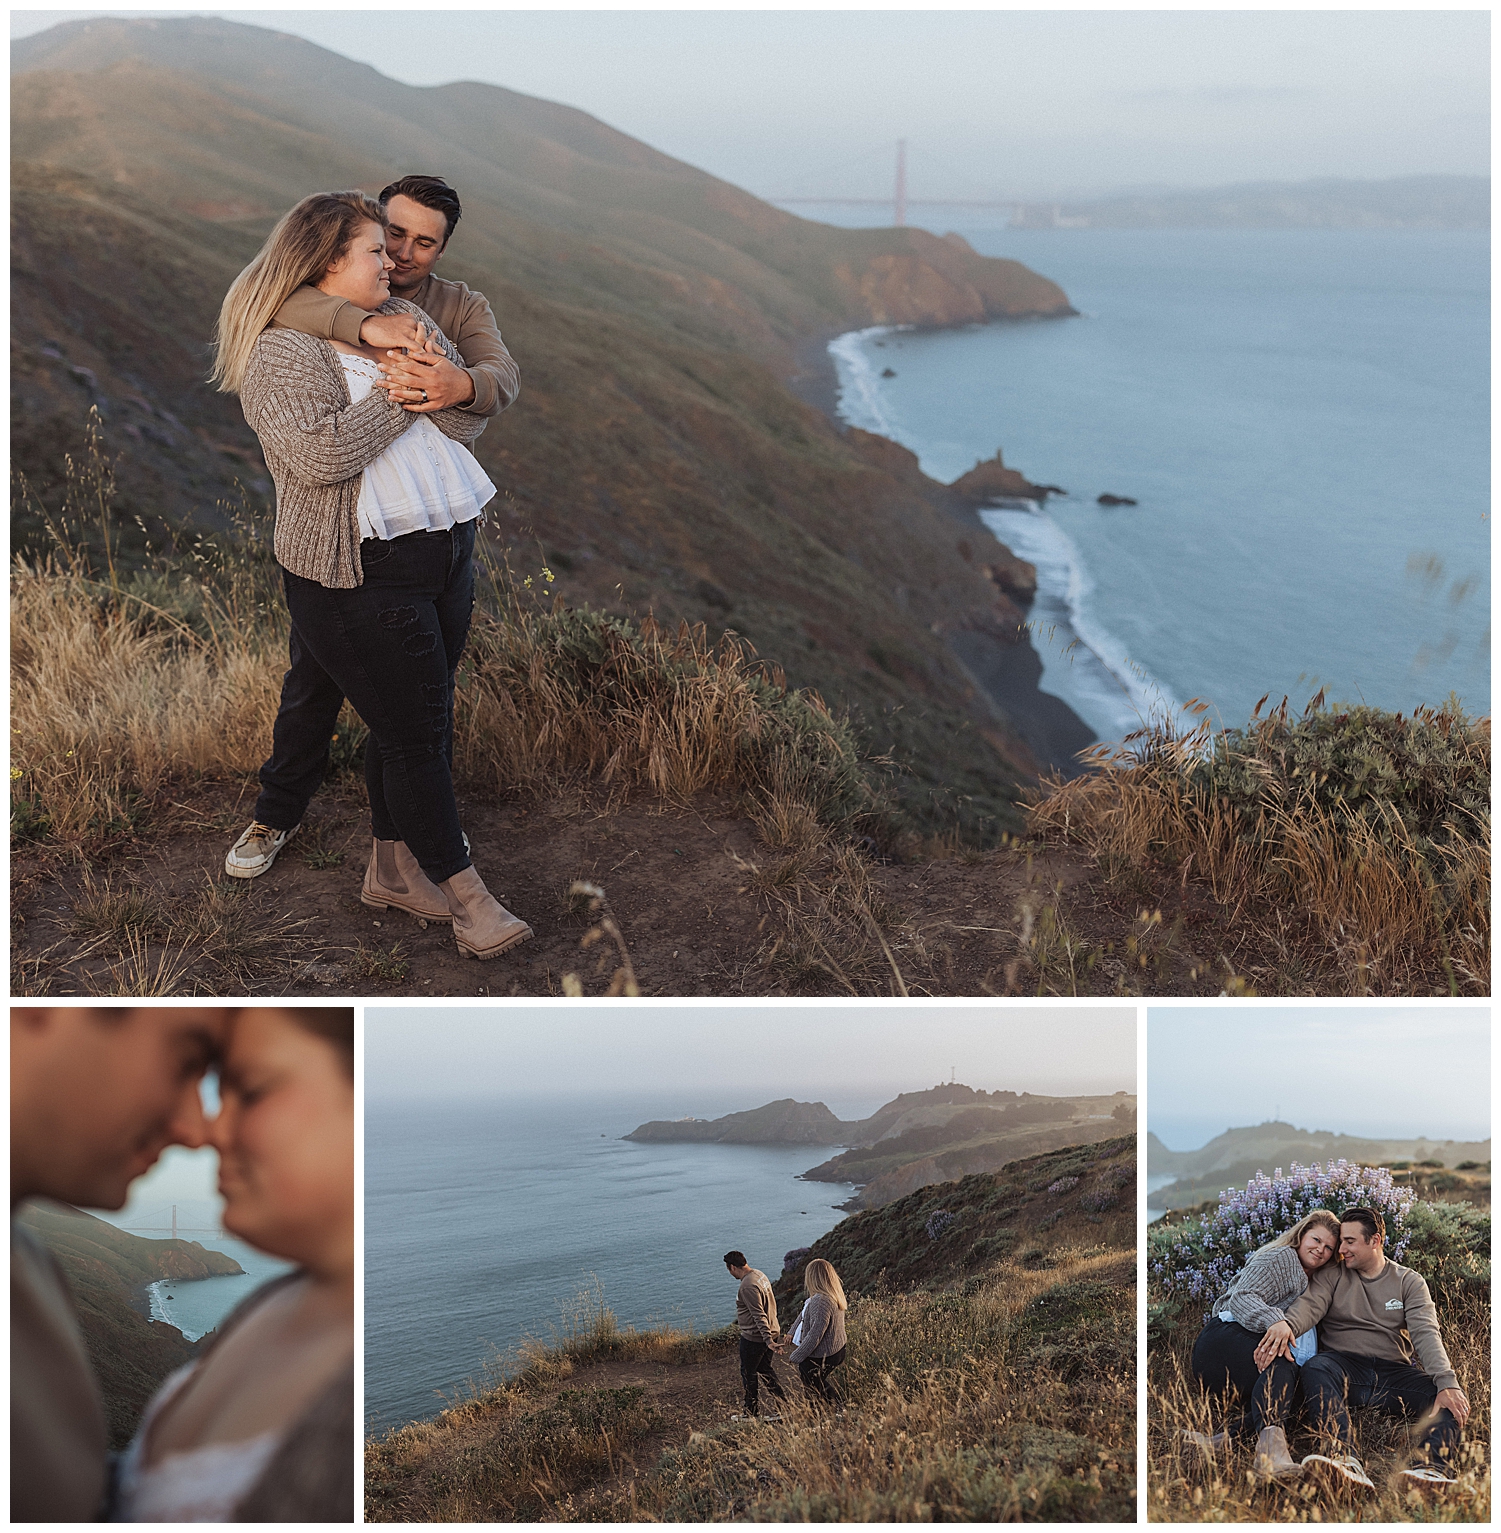 Epic couples photos at Battery Rathbone McIndoe in the Marin Headlands.